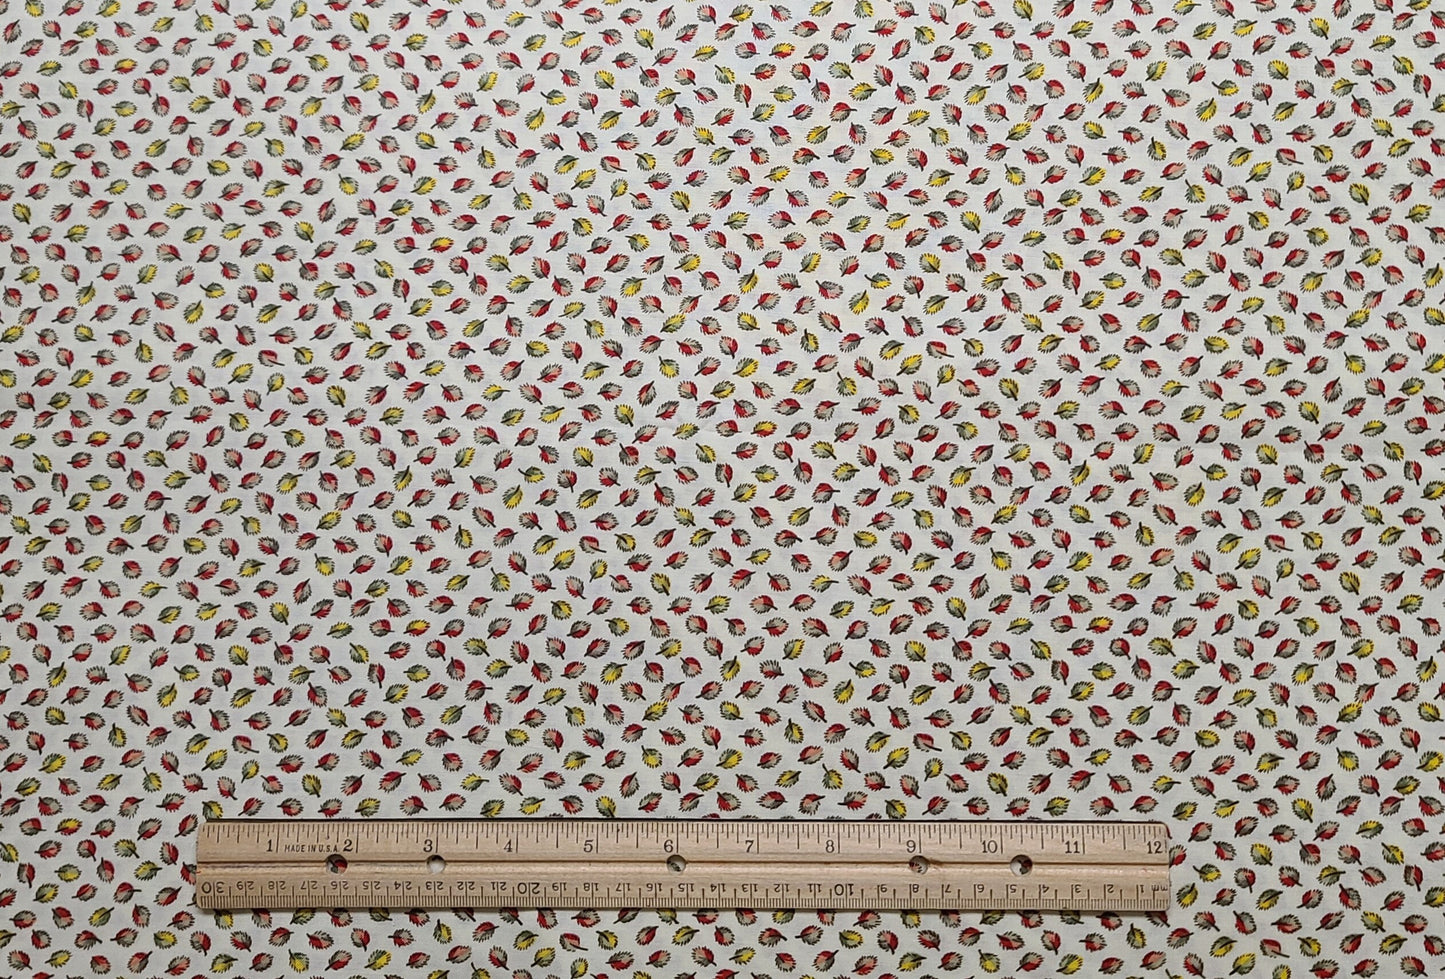 JoAnn Fabric - Soft White Fabric / Red, Green, Yellow Tossed Leaf Print